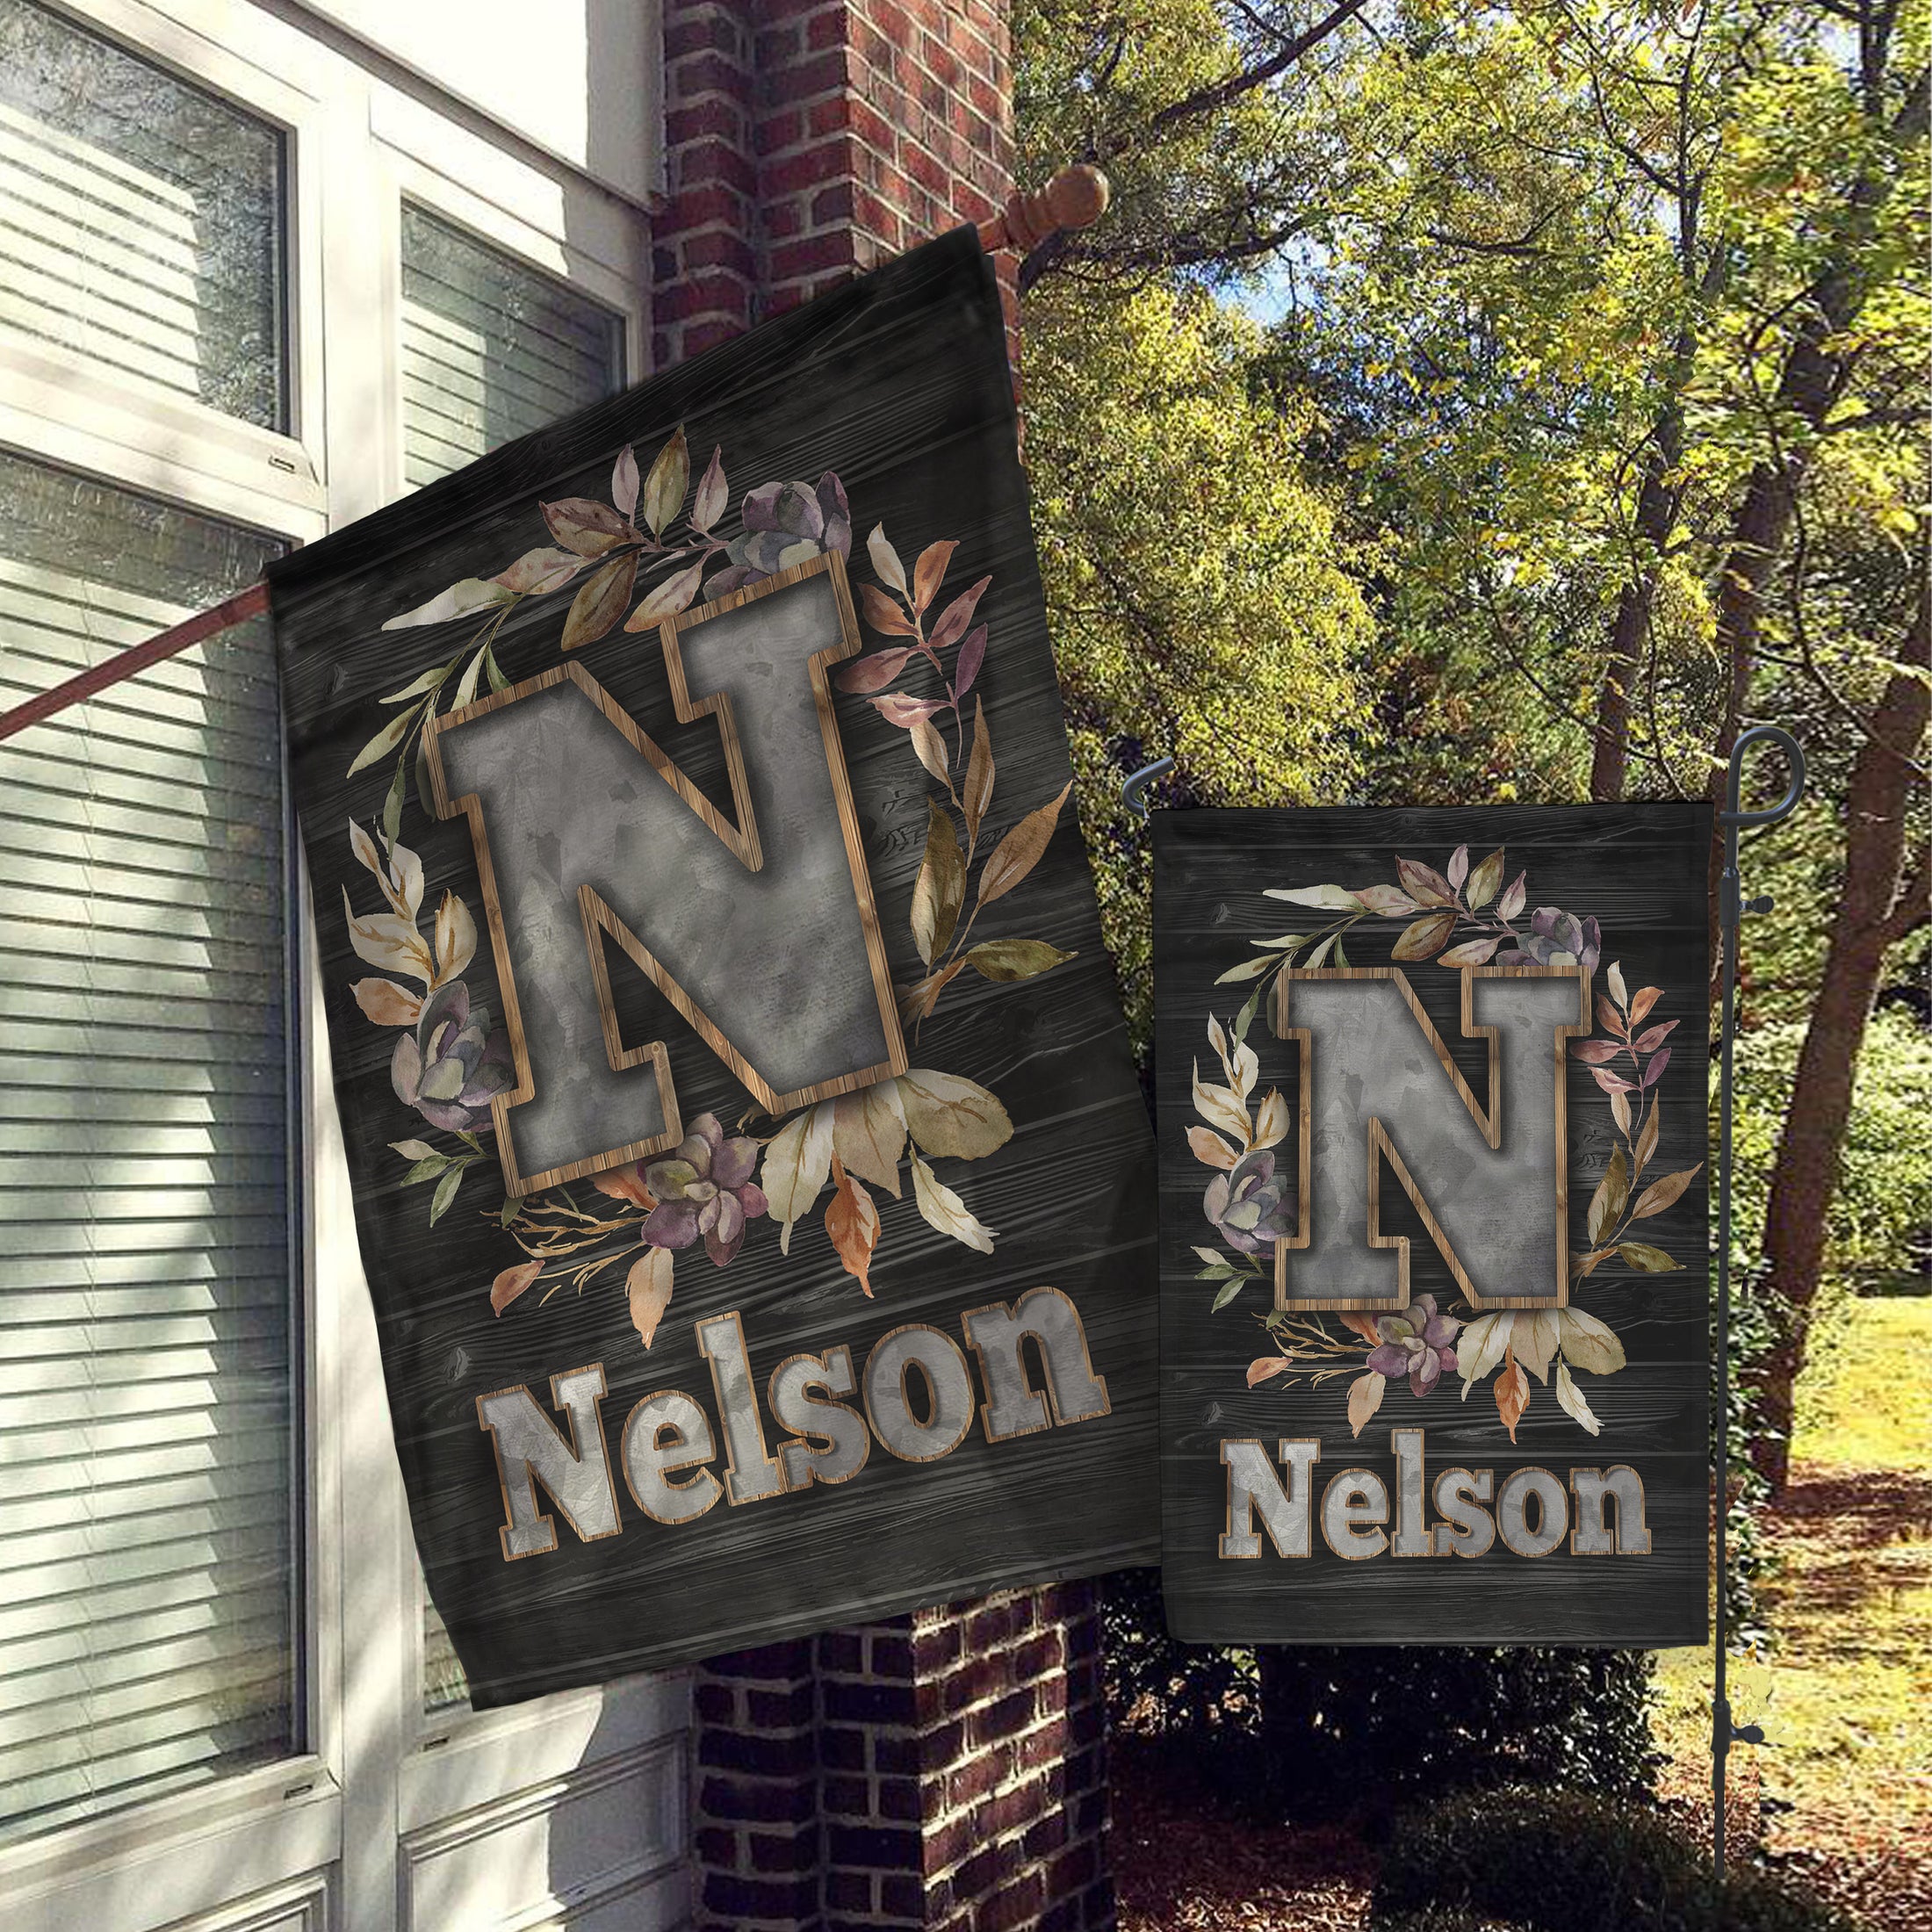 Personalized Flag